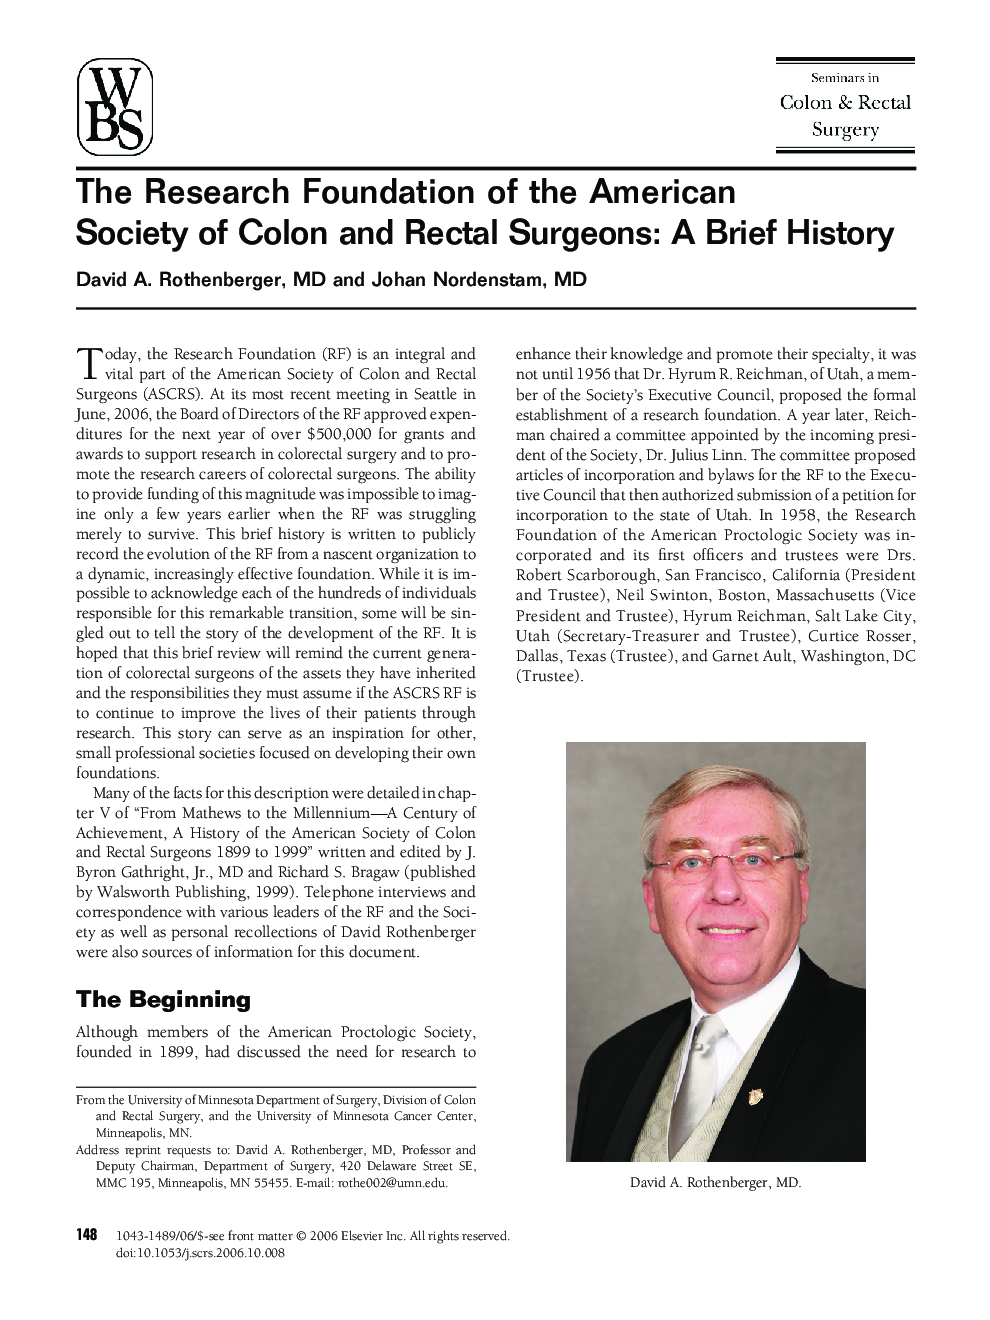 The Research Foundation of the American Society of Colon and Rectal Surgeons: A Brief History